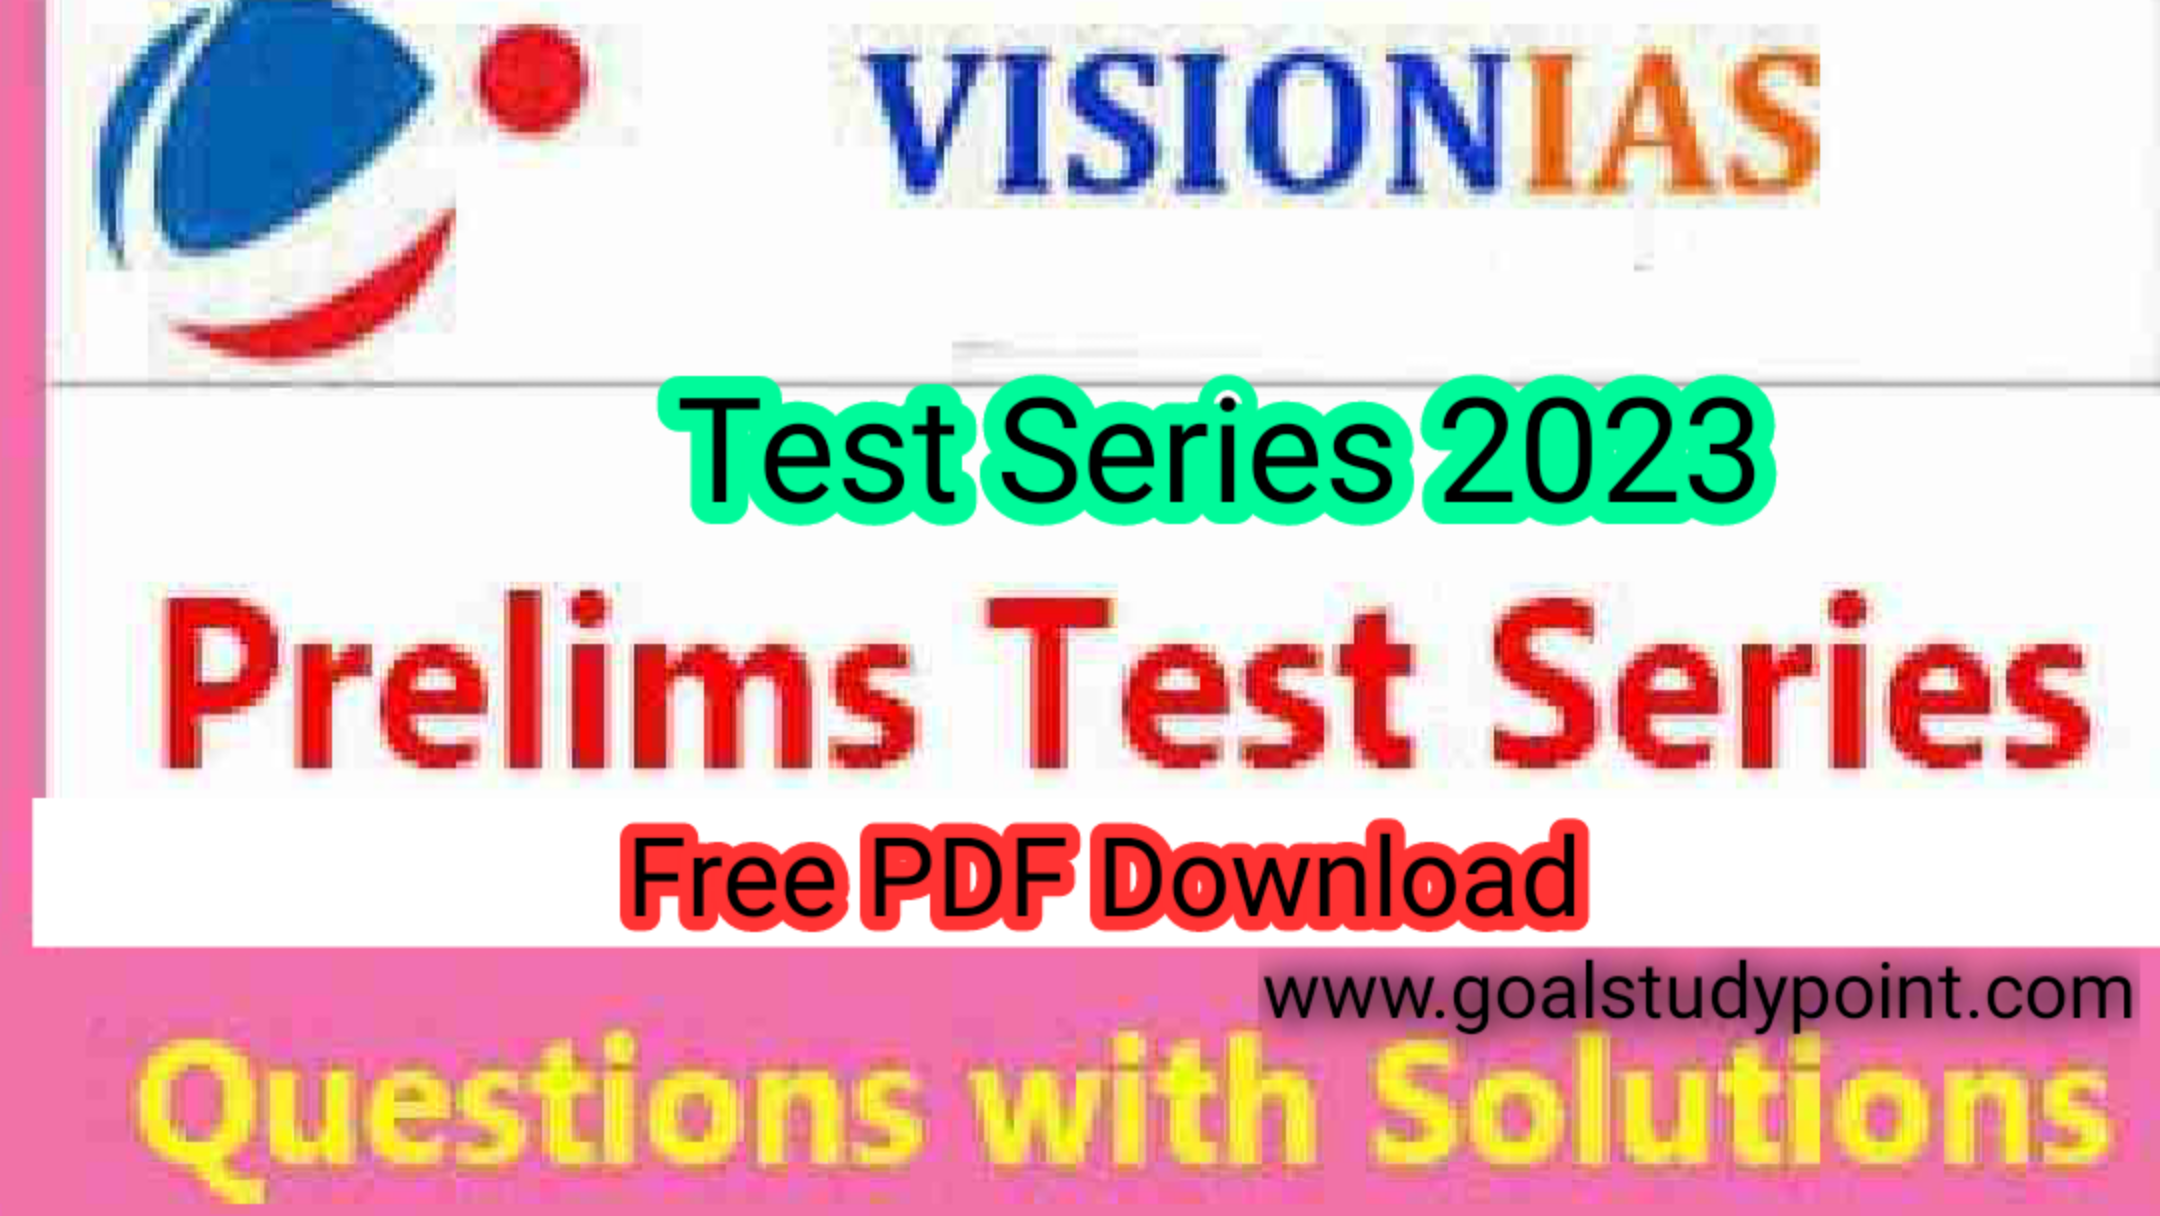 Vision ias mains 365 PDF Download For 2023